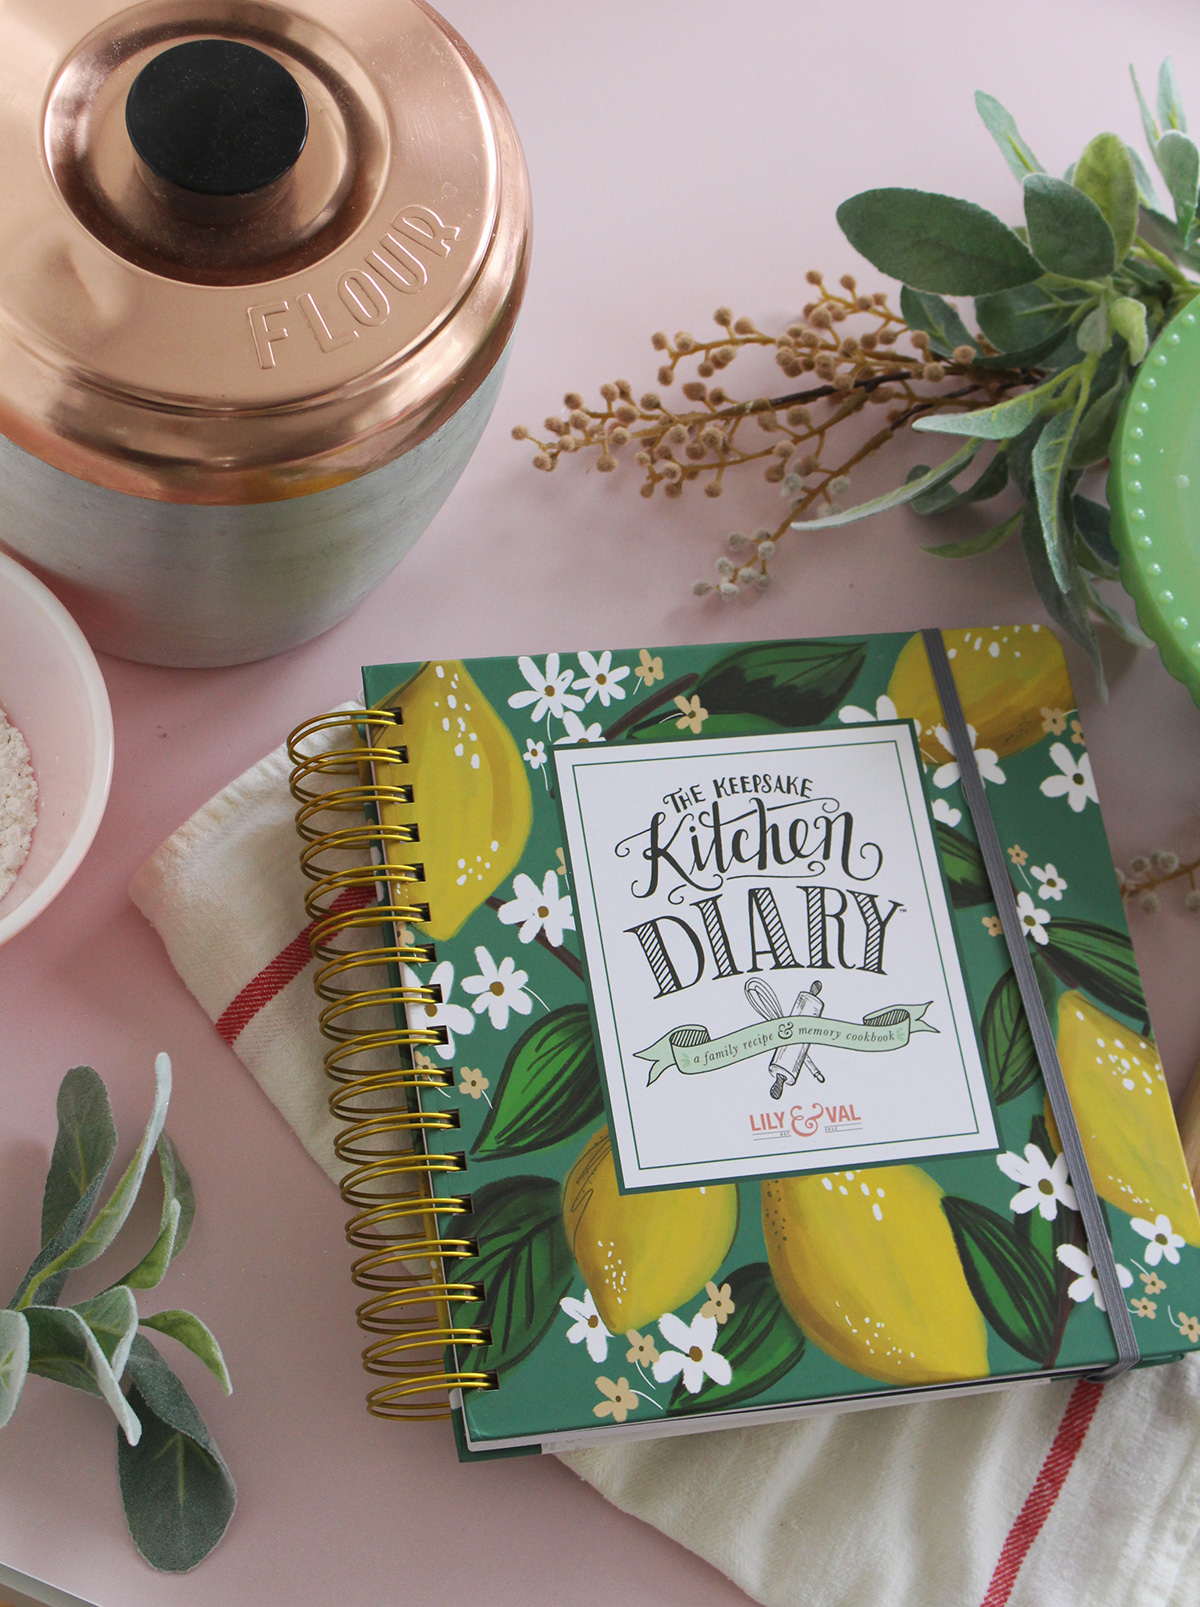 If you're not familiar with The Diary, it's the perfect way to preserve your favorite family recipes and the memories that go with them. This is certainly the perfect time of year to begin yours as many cherished recipes are sure to be shared!